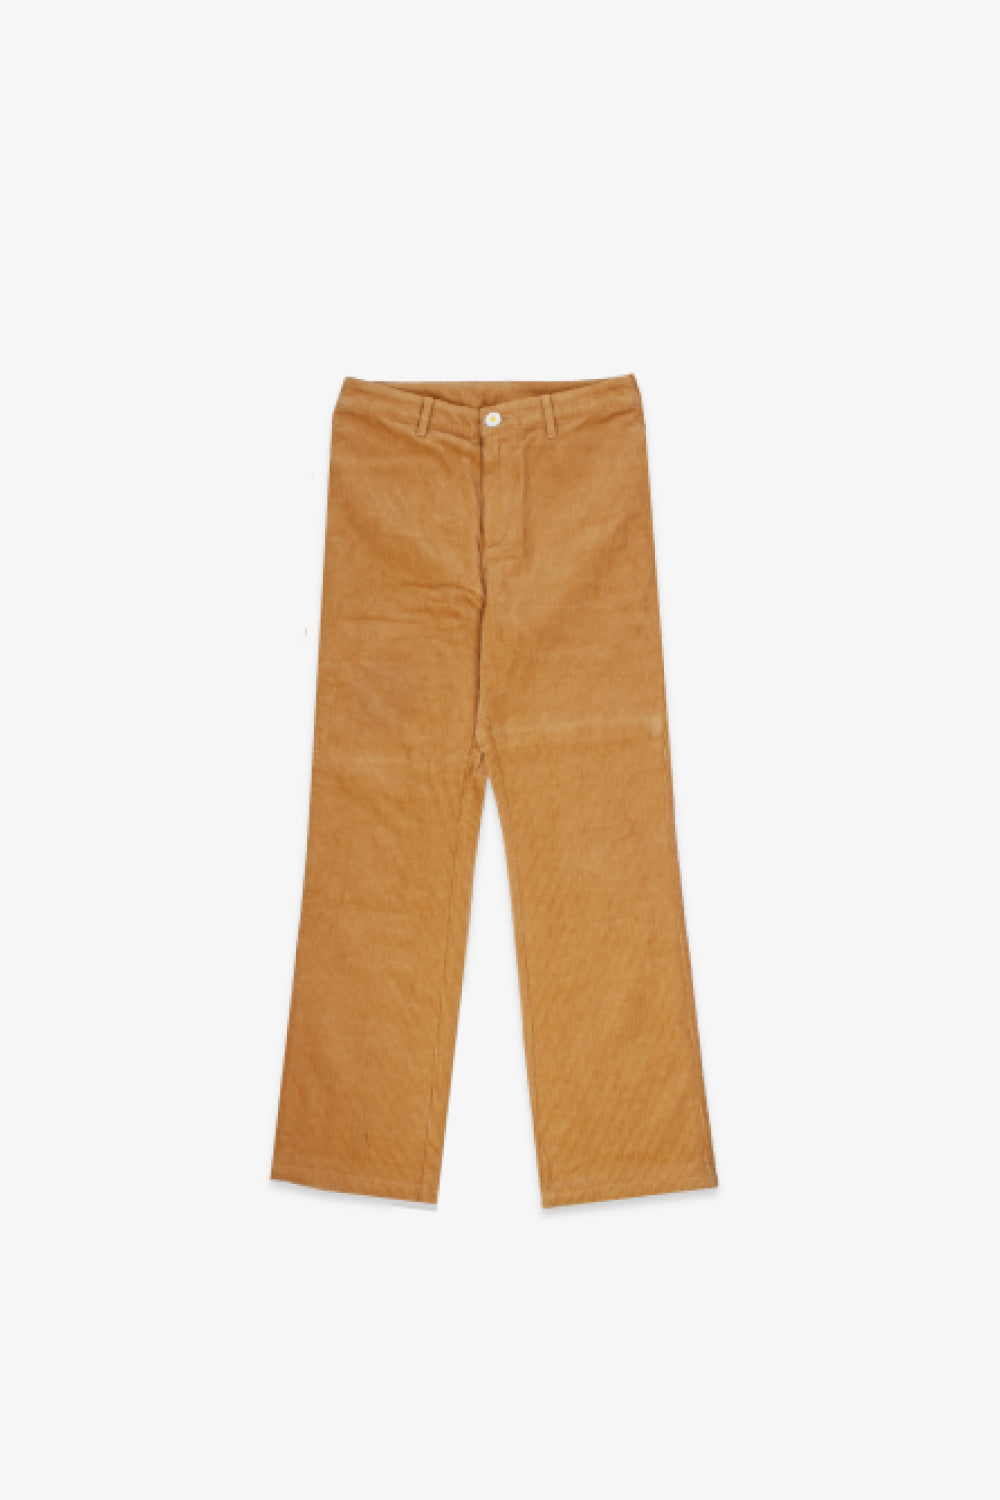 Antique Brown Flared Corduroy Trousers